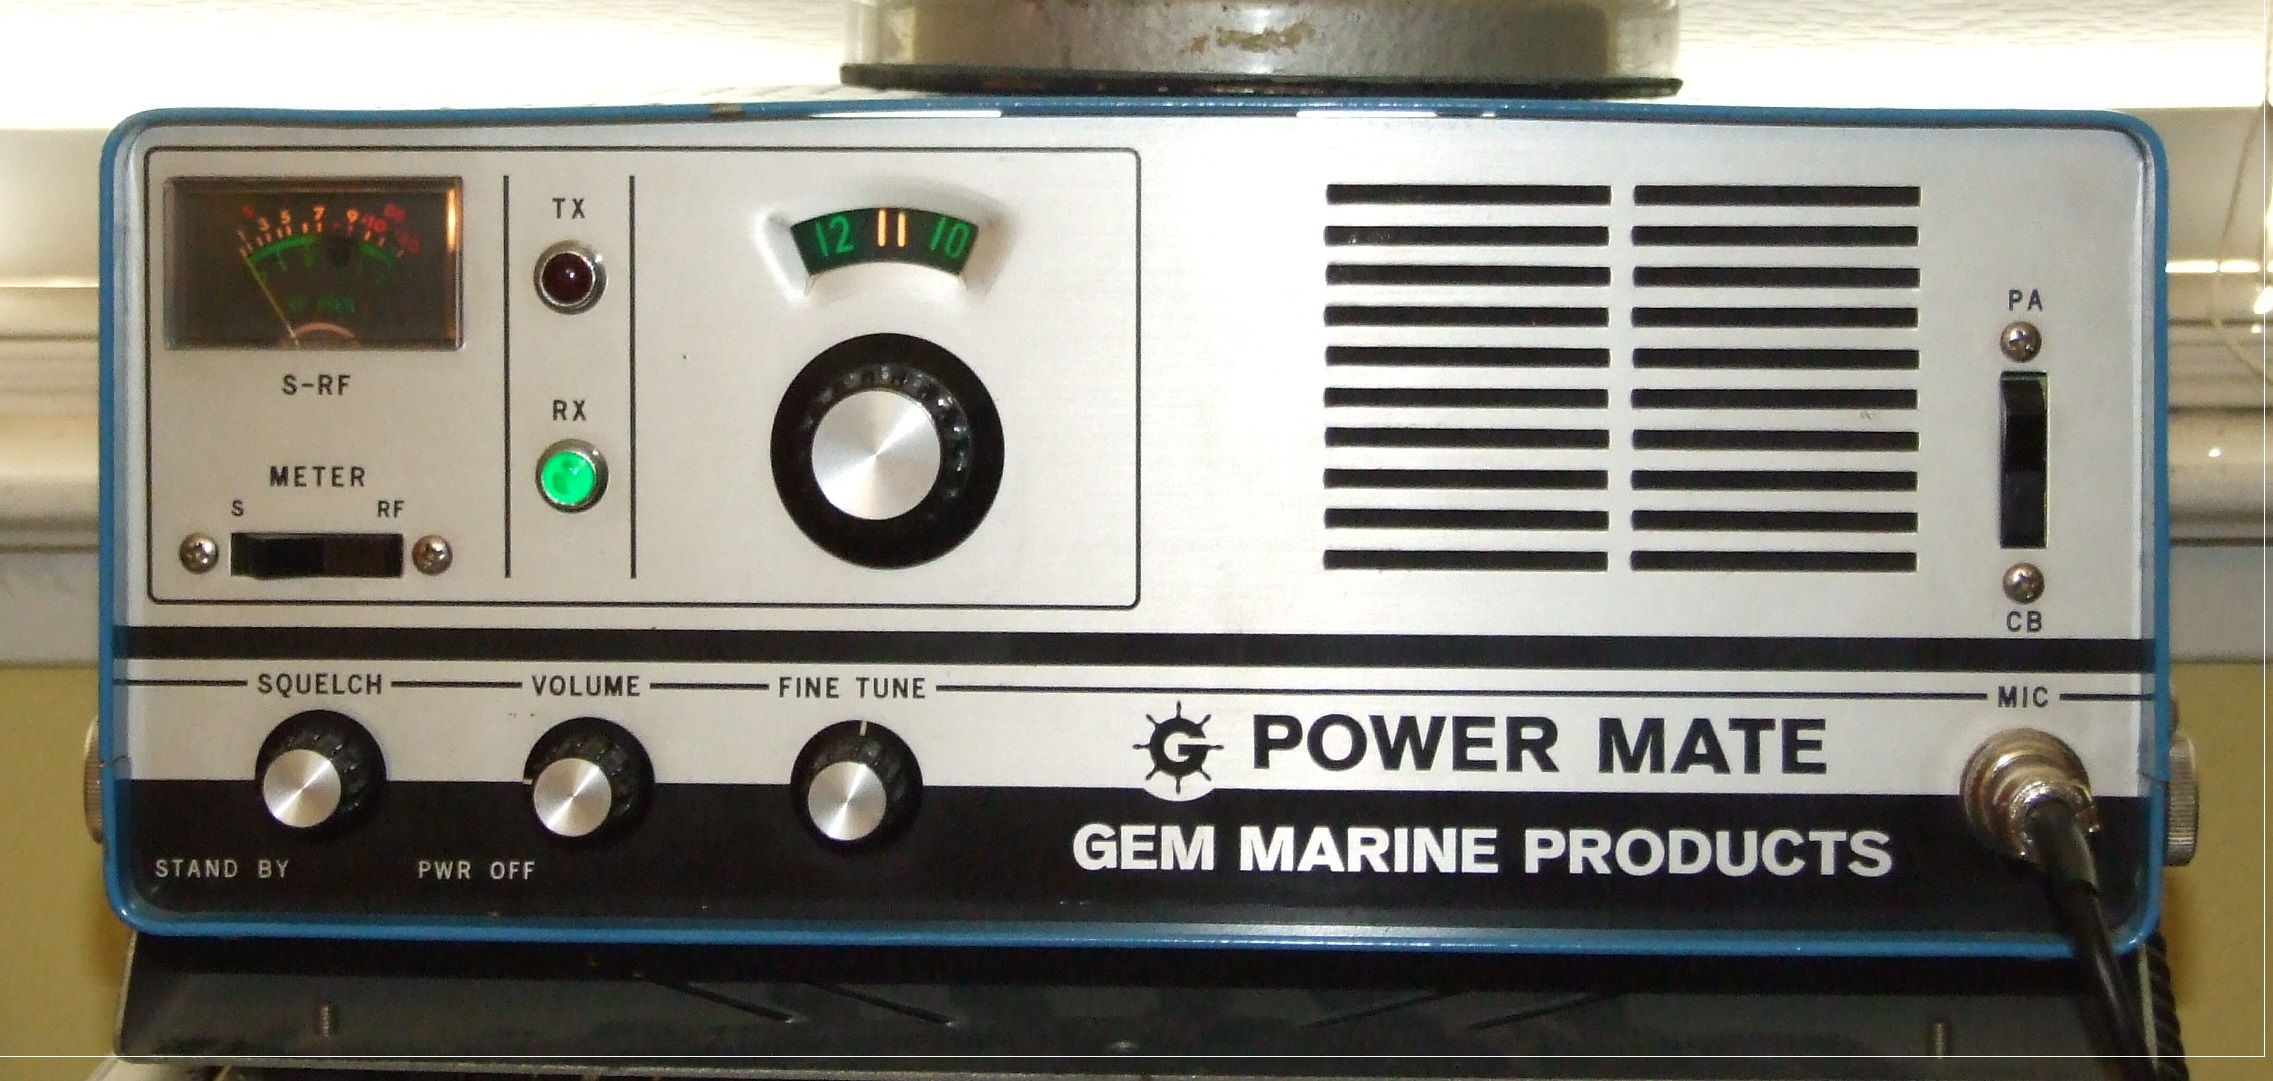 Gem Marine Power Mate – photo from the collection of Chris.